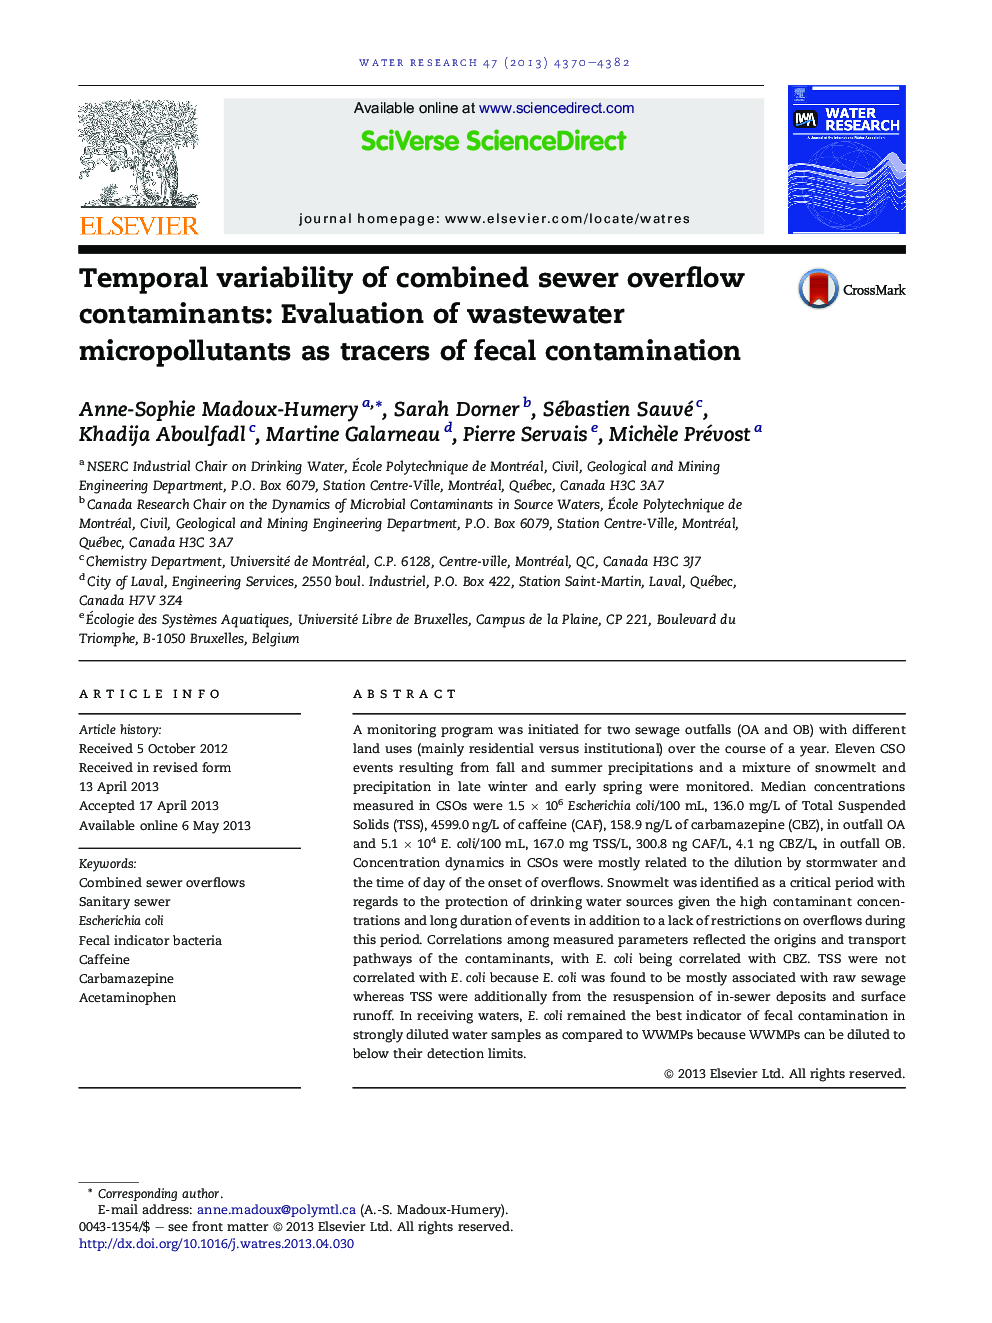 Temporal variability of combined sewer overflow contaminants: Evaluation of wastewater micropollutants as tracers of fecal contamination